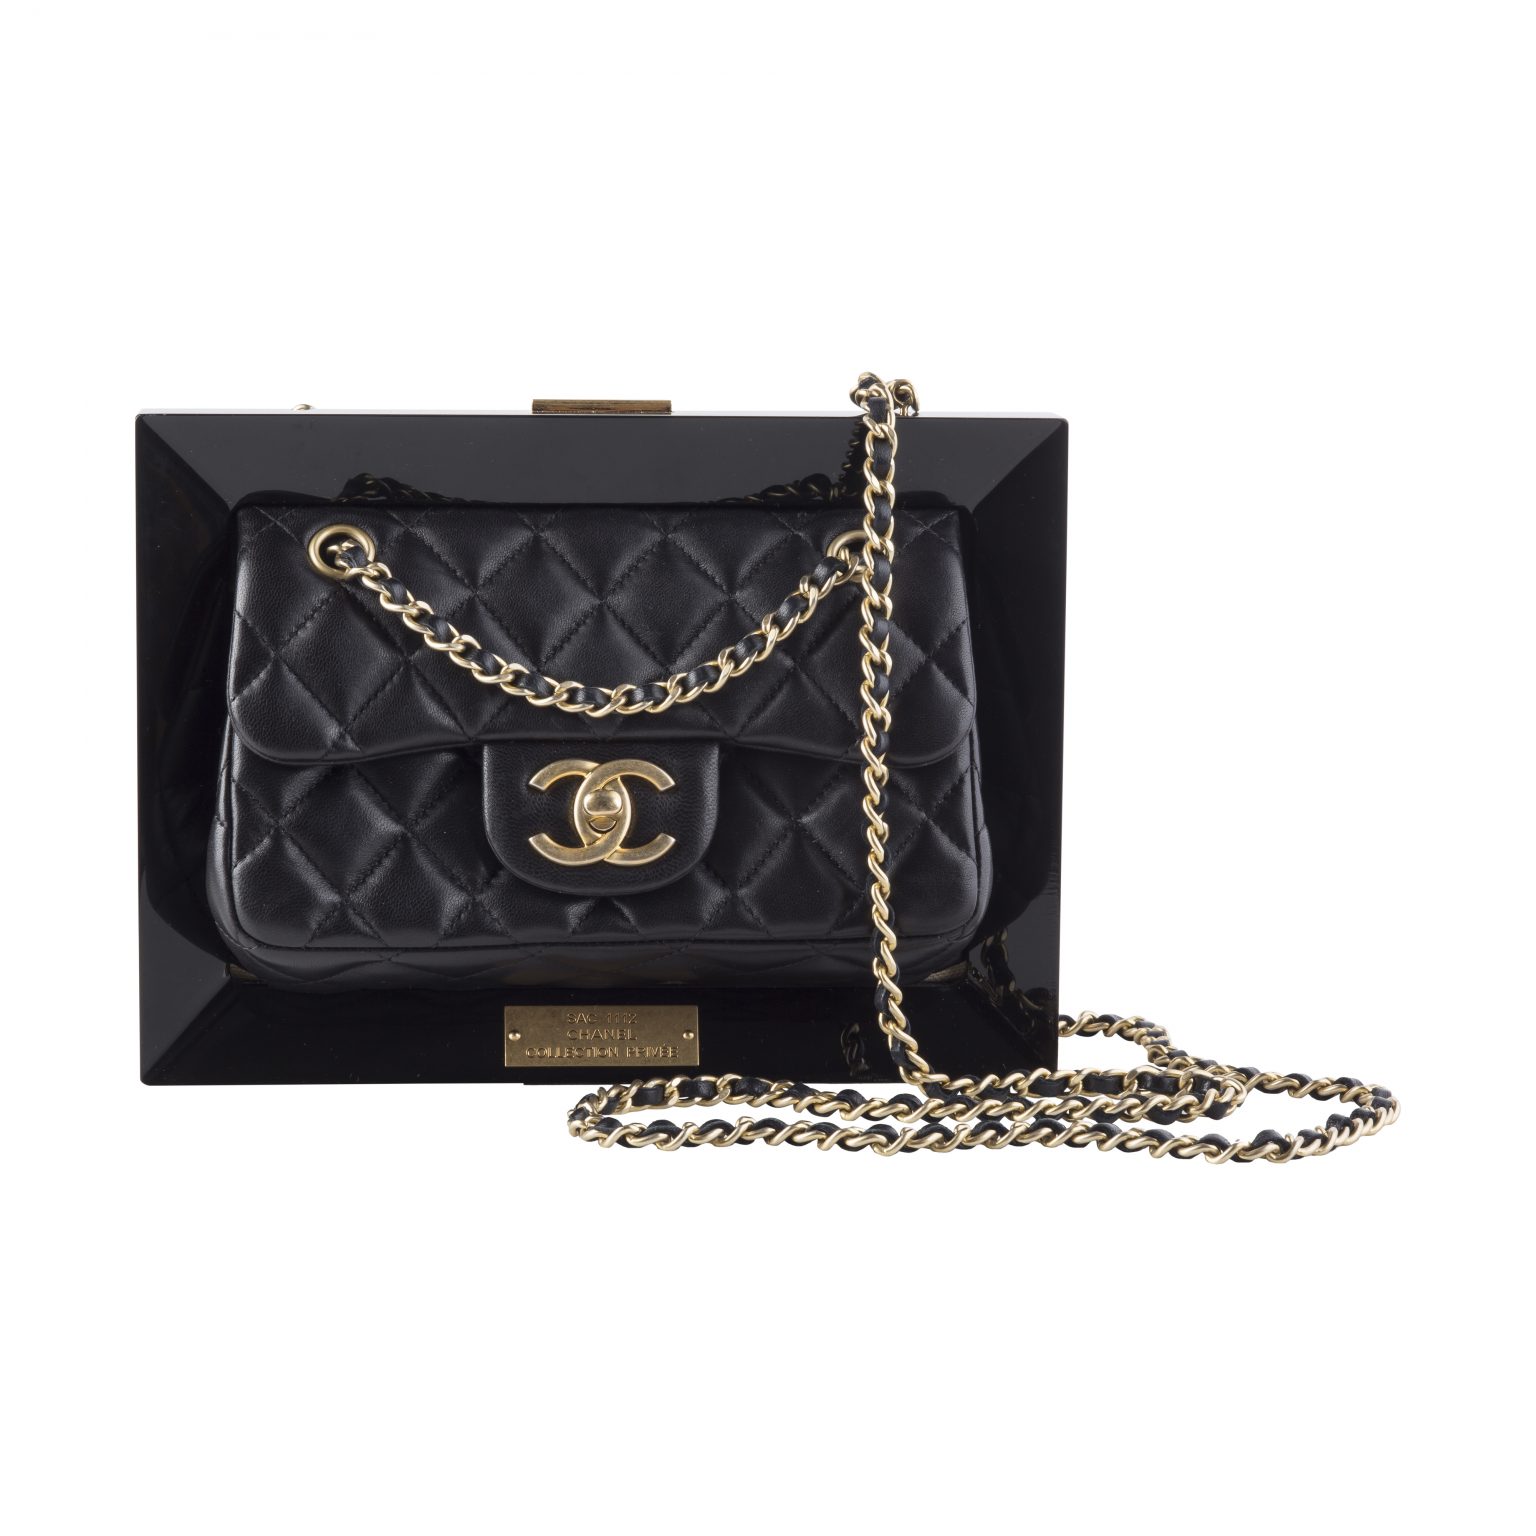 Chanel Limited Edition Black Lucite Lambskin Leather Frame Bag